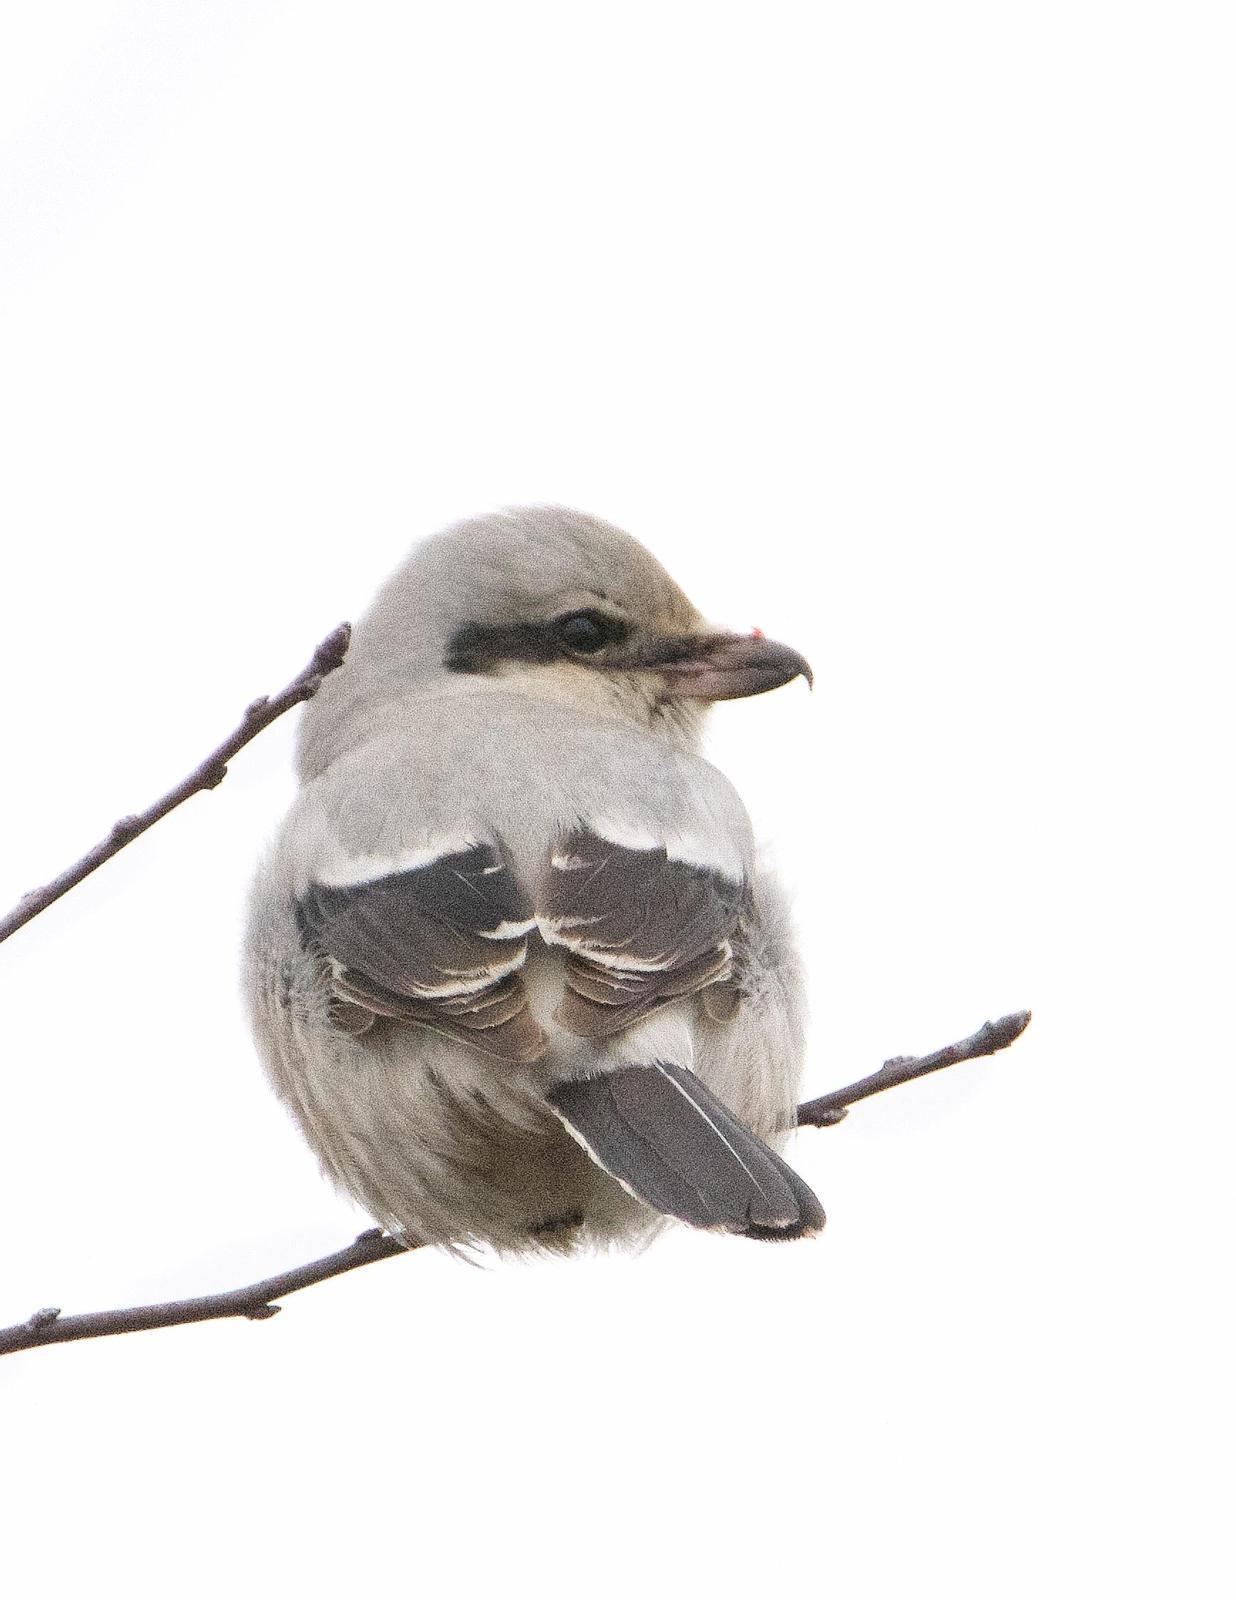 Northern Shrike Photo by Brian Avent